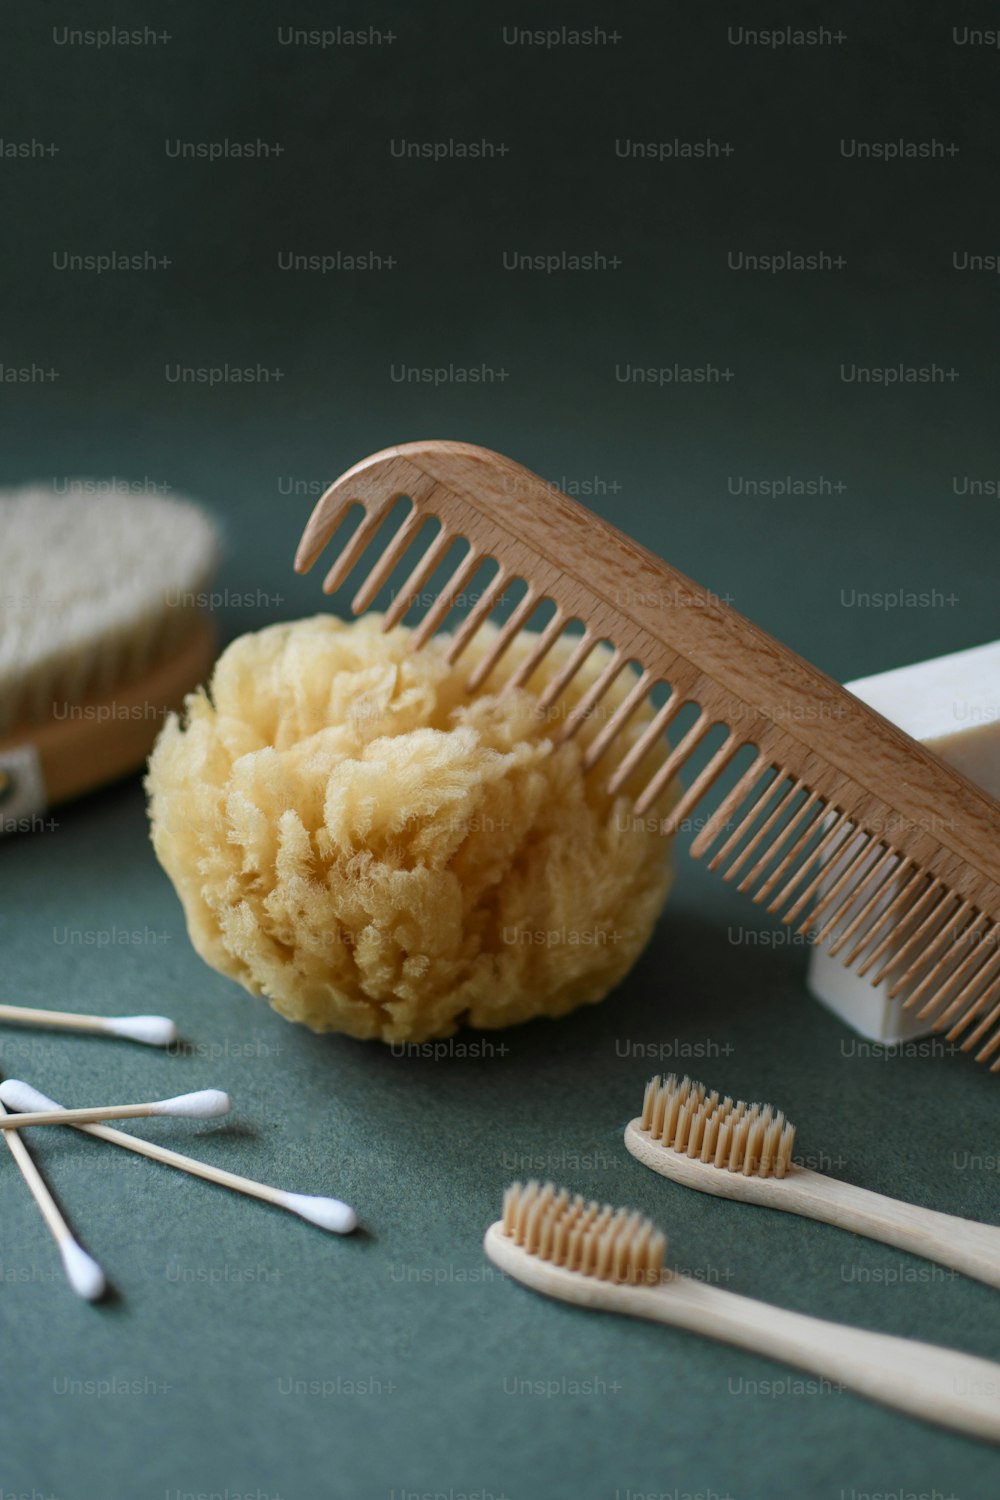 a comb, brush, and other items on a table